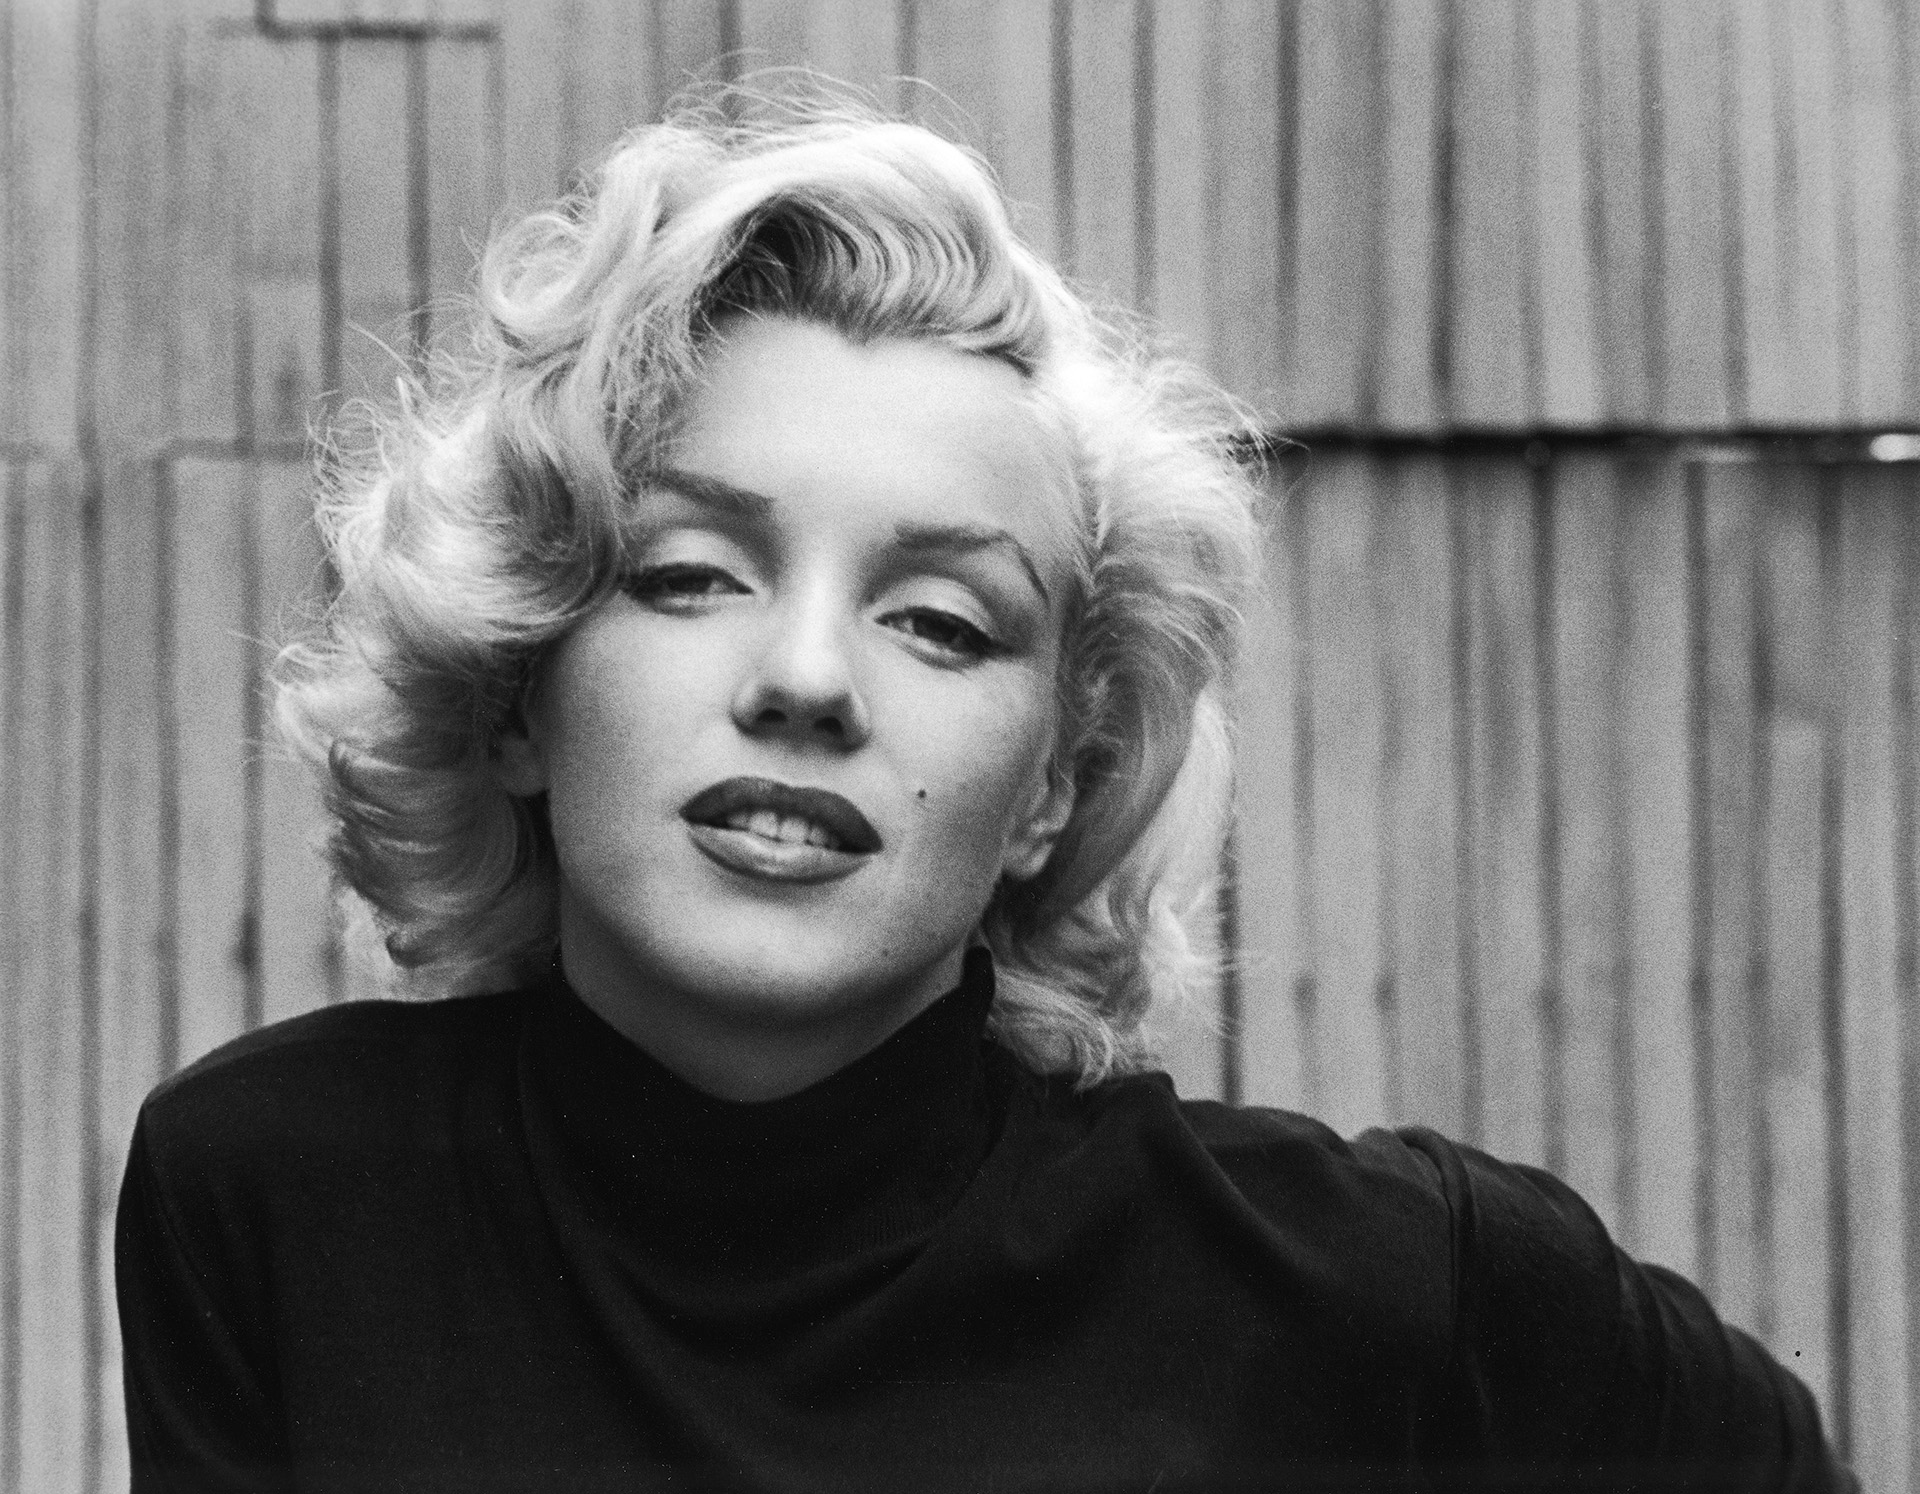 CALIFORNIA, UNITED STATES - 1953:  Actress Marilyn Monroe.  (Photo by Alfred Eisenstaedt/Pix Inc./The LIFE Picture Collection/Getty Images)